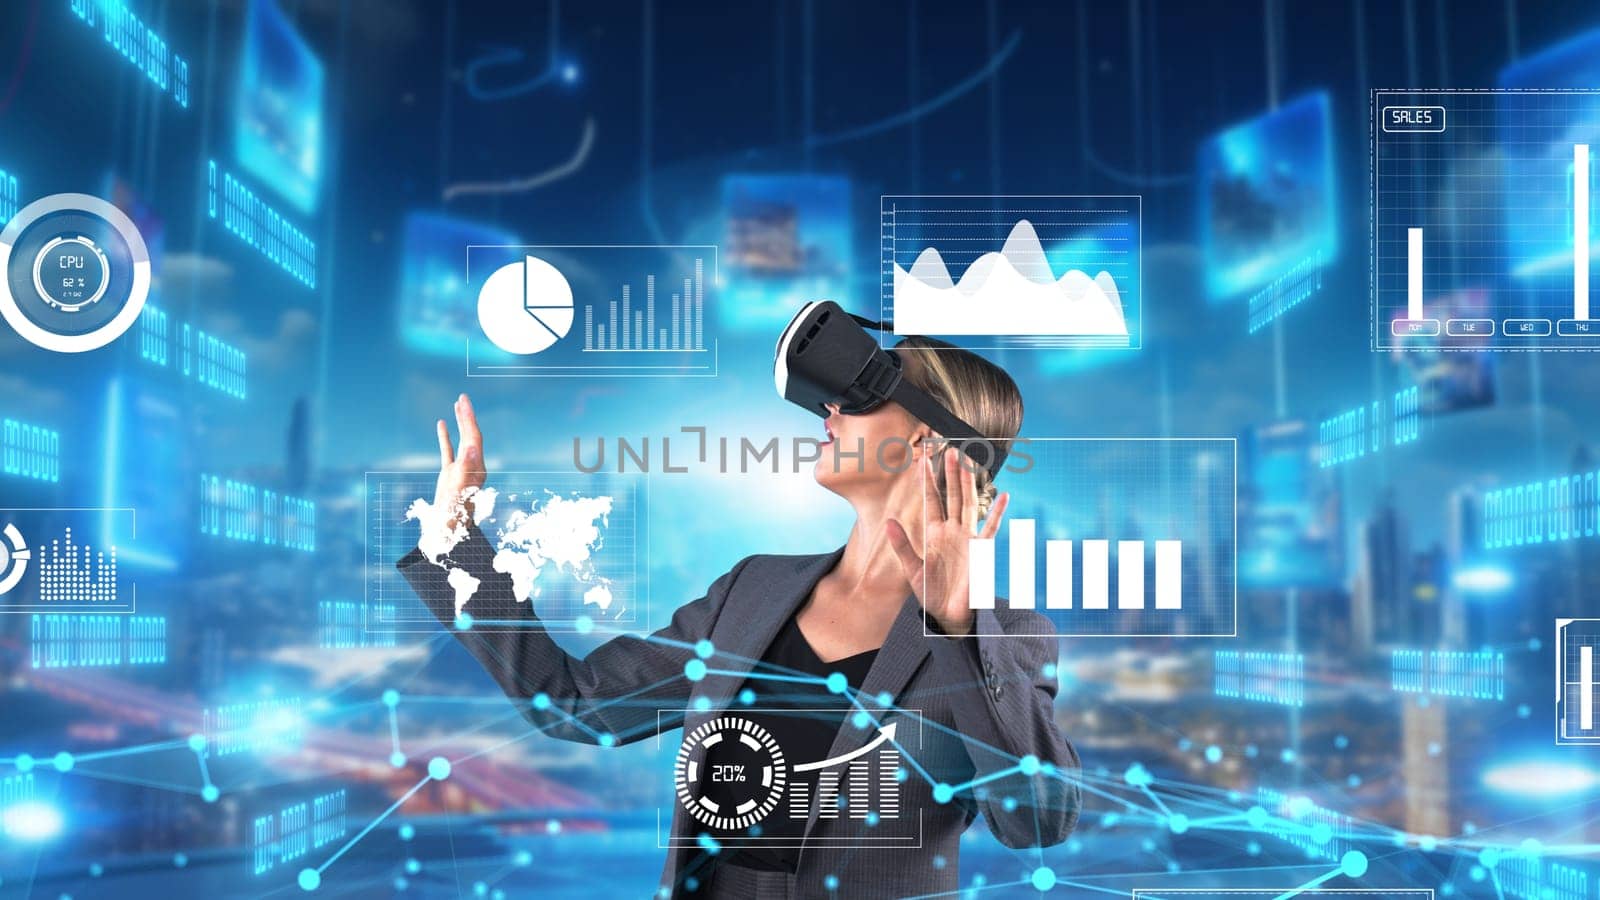 Woman reporter explaining dynamic market data calculated analysis pointing big data business by VR innovation interface digital infographic network technology visual hologram animation. Contraption.